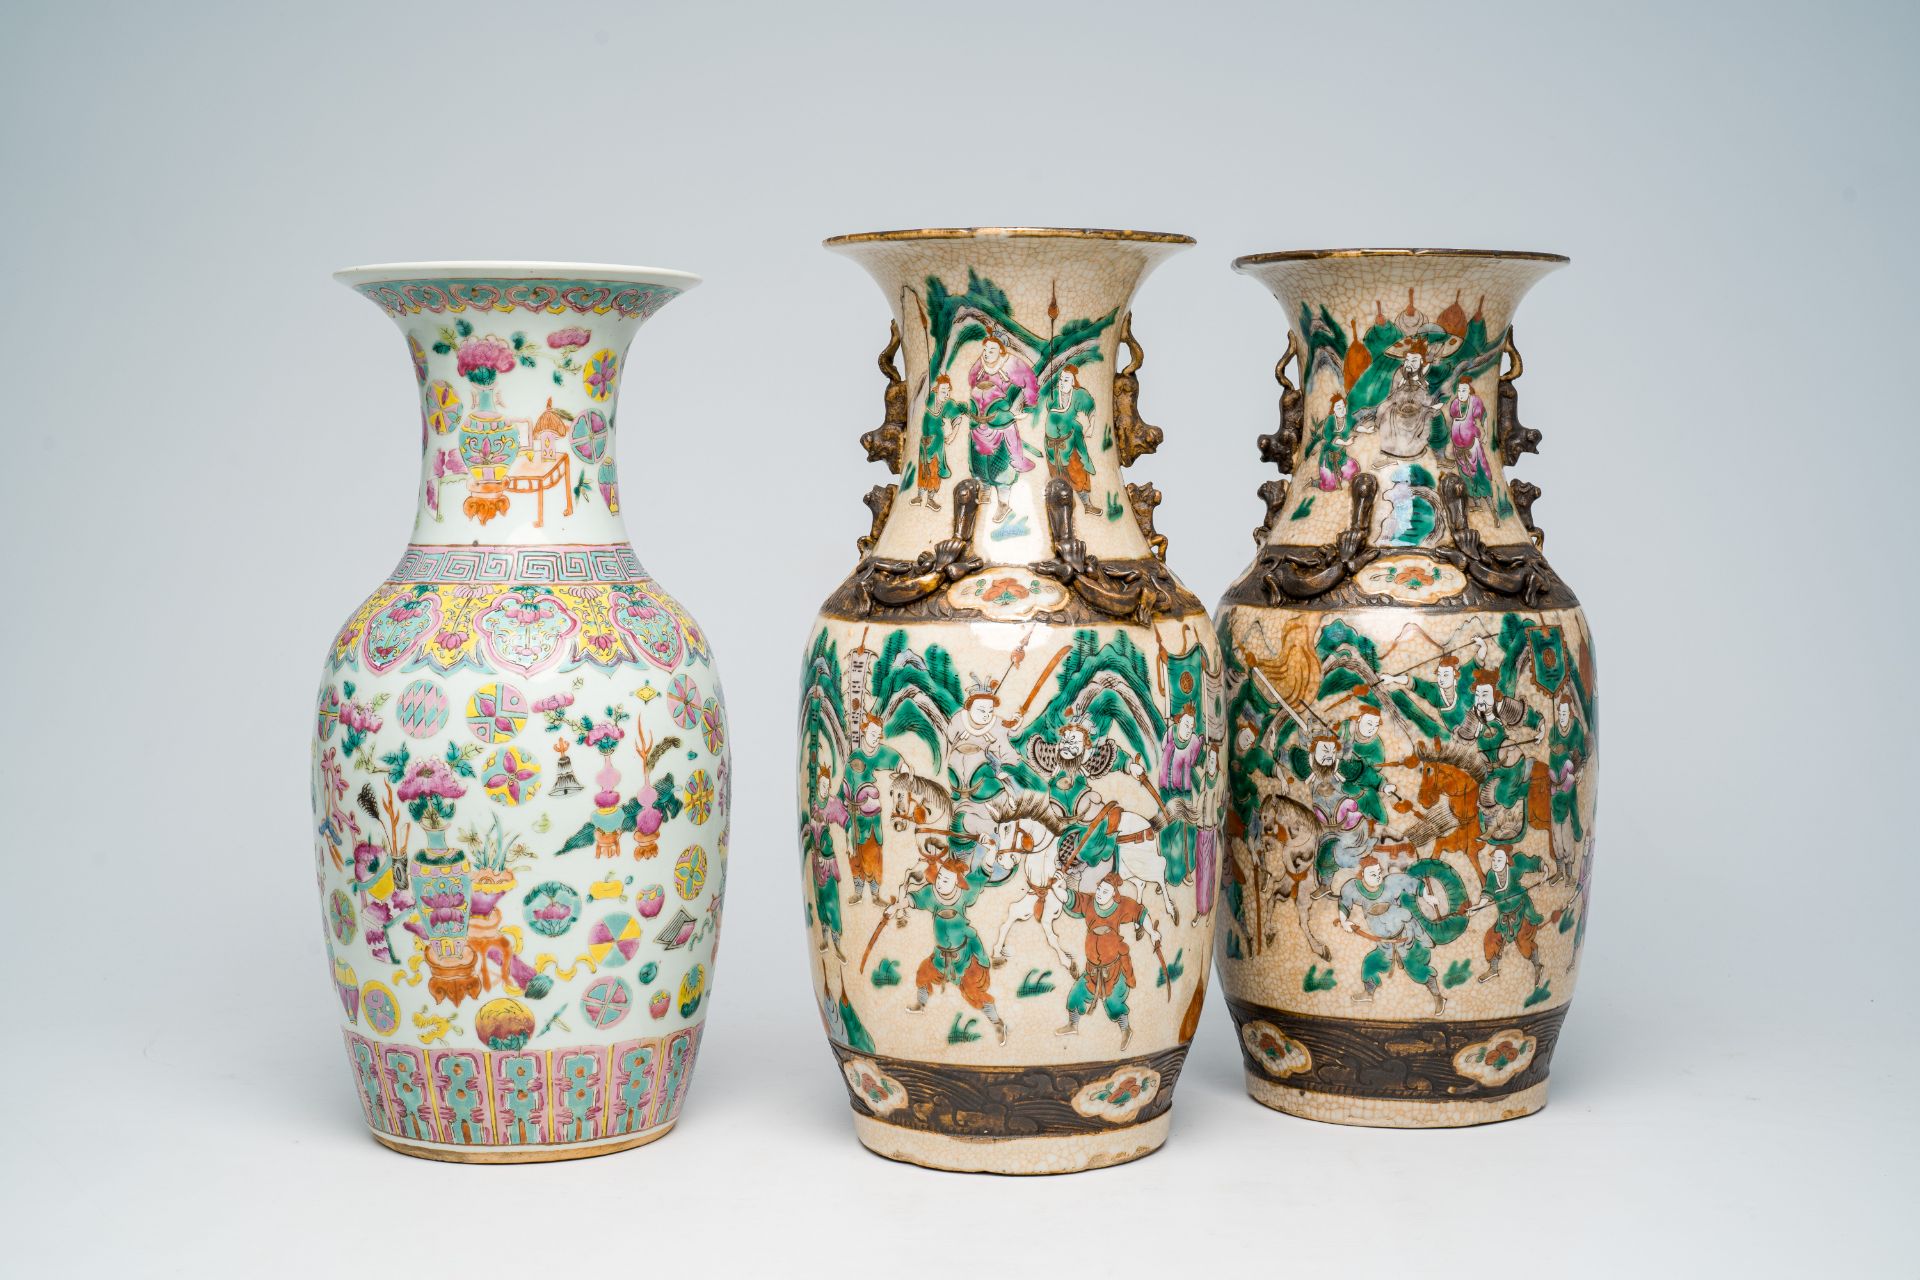 Two Chinese Nanking crackle glazed famille rose 'warrior' vases and an 'antiquities' vase, 19th C.